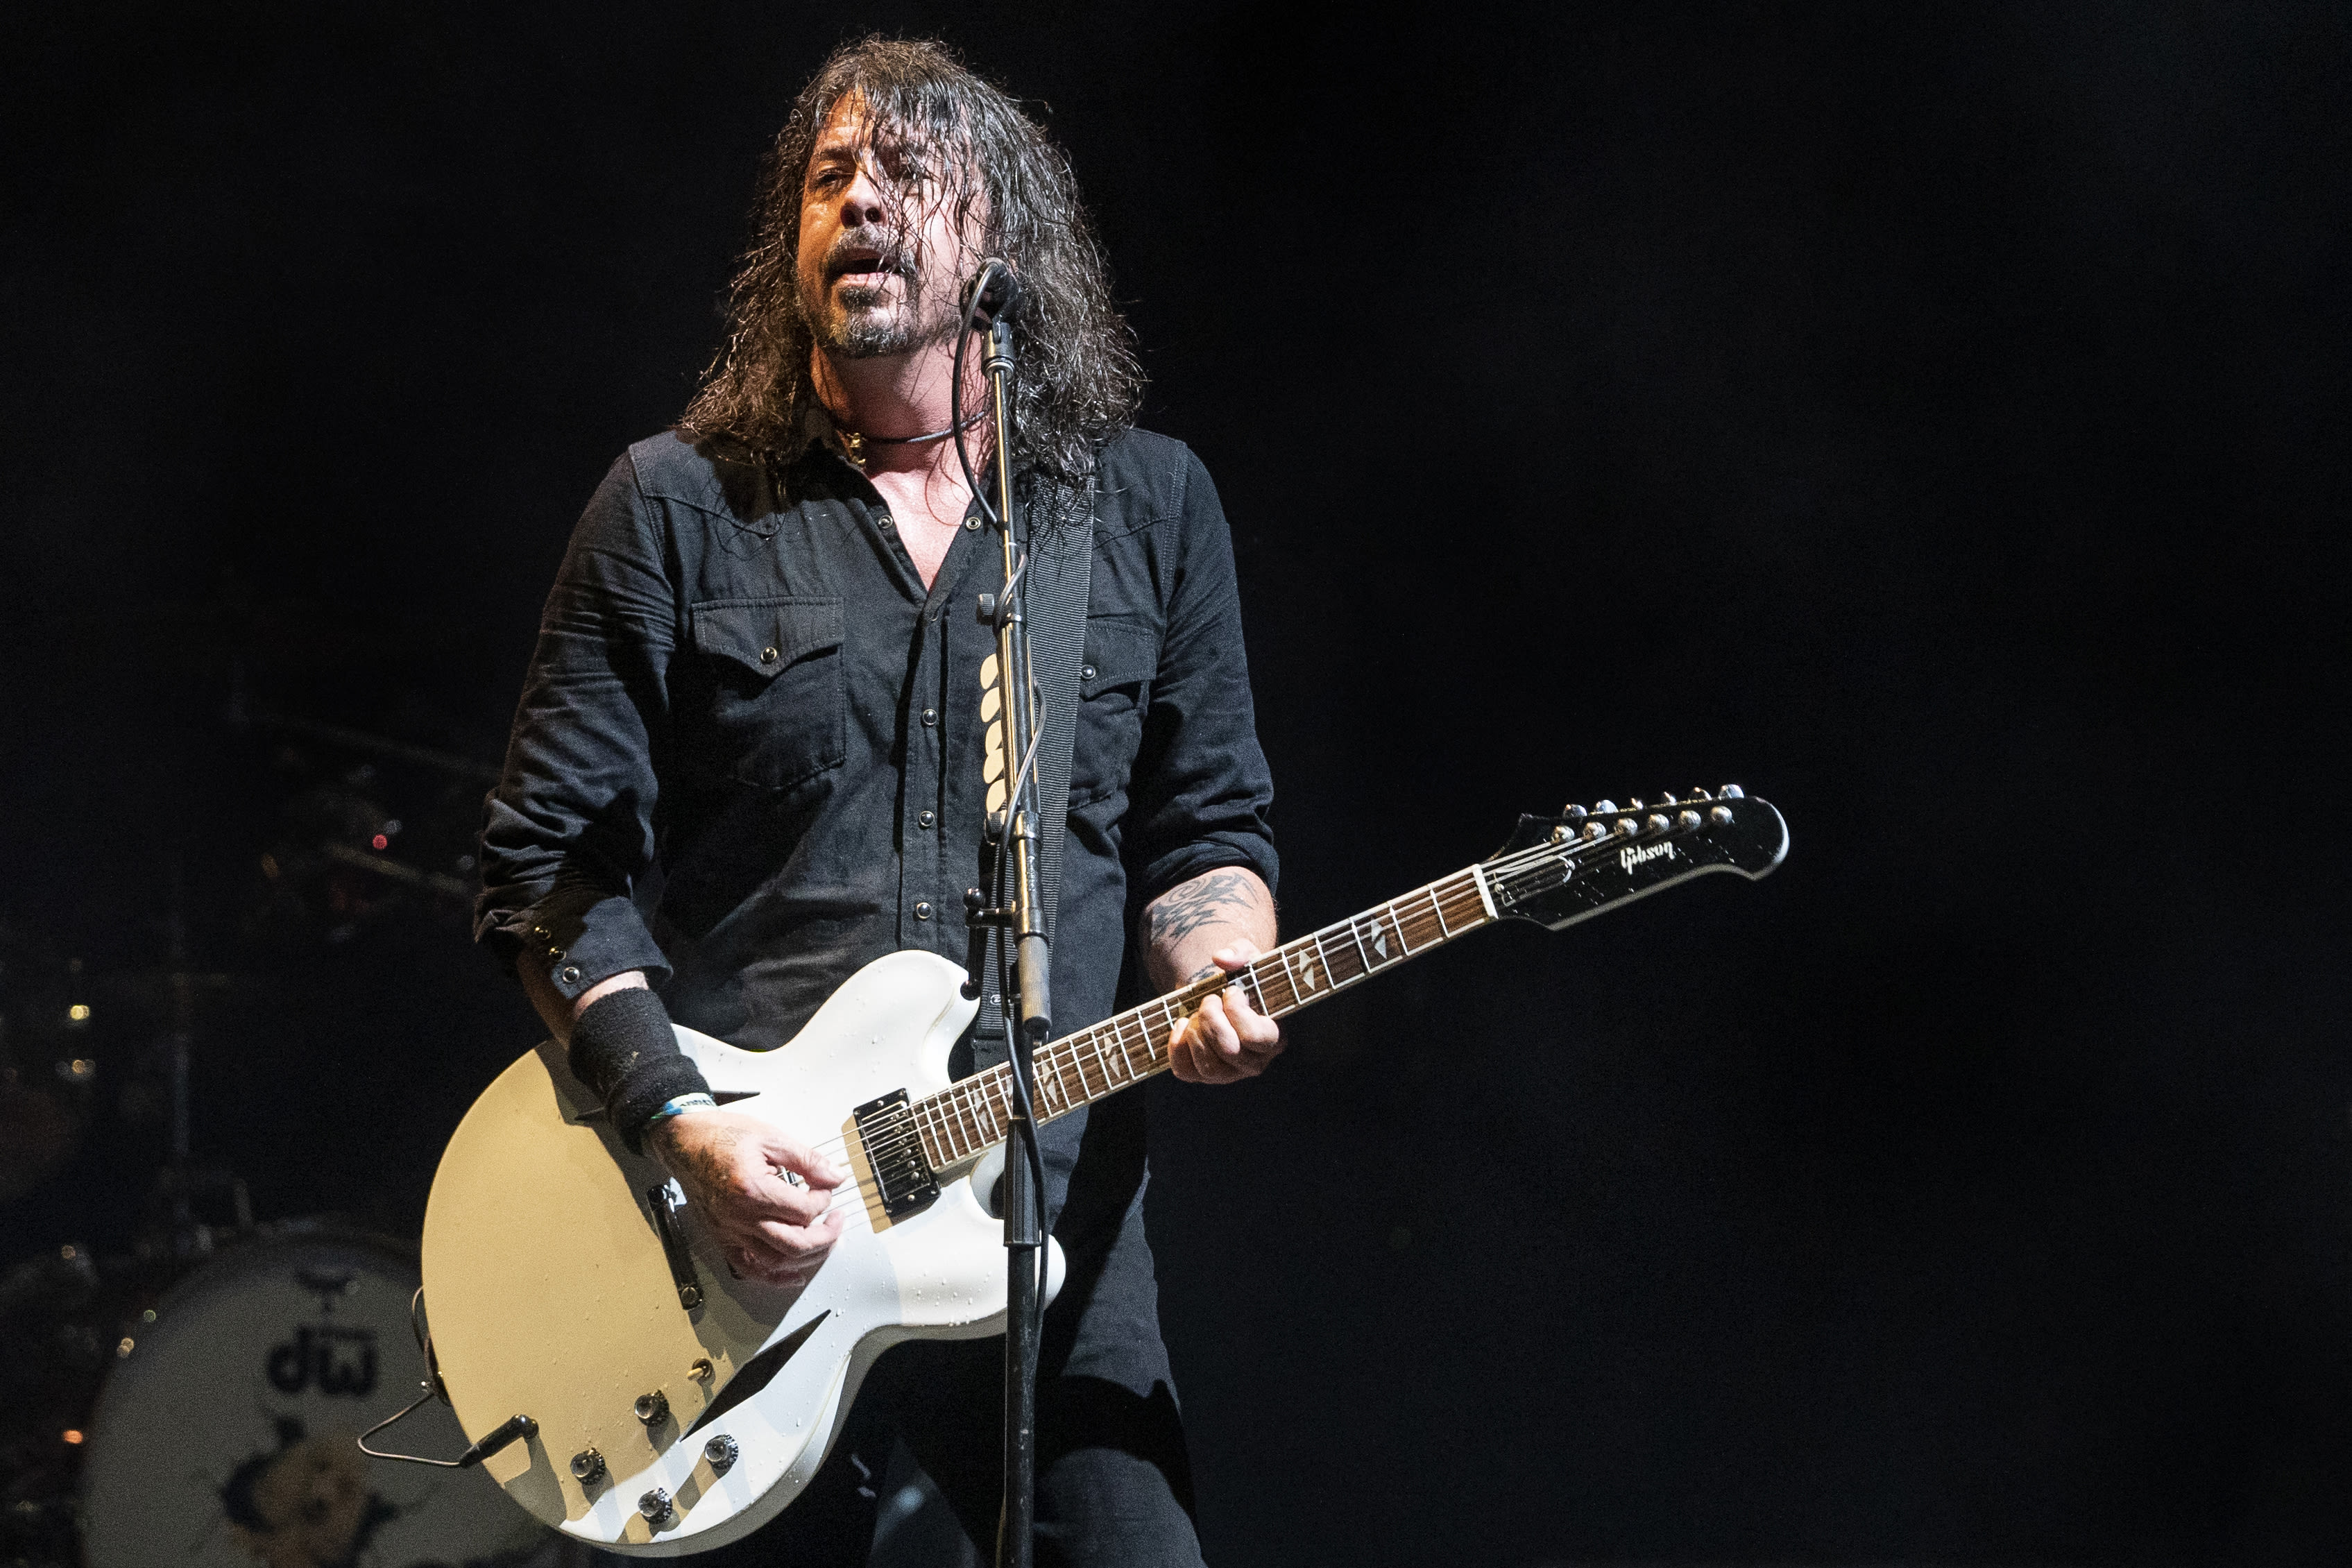 Dave Grohl looks nearly unrecognizable with clean-cut look post-Taylor diss